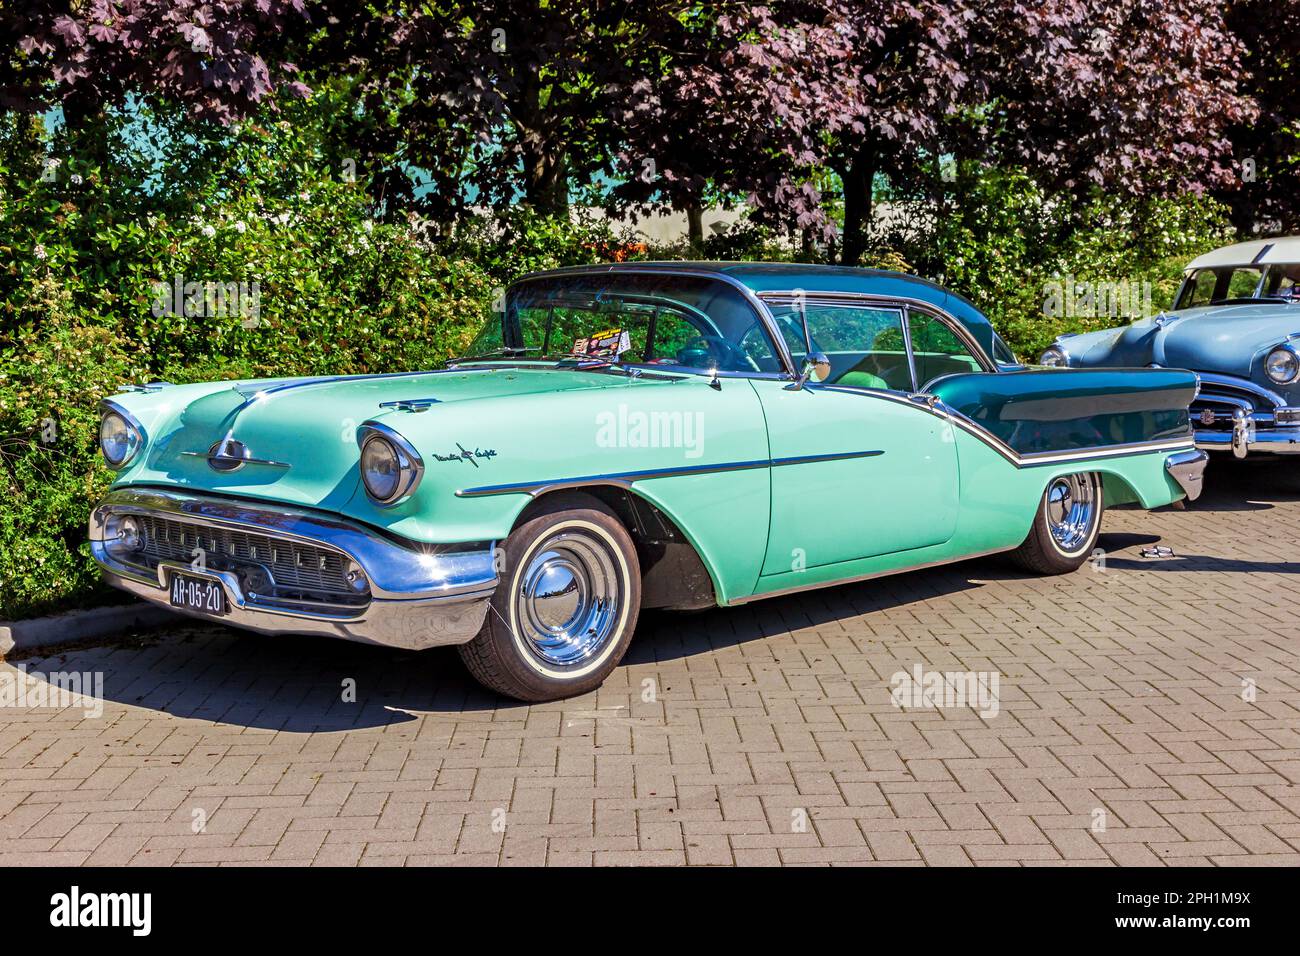 1957 Oldsmobile Starfire 98 Holiday Coupe vintage car. Den Bosch, The Netherlands - May 8, 2016 Stock Photo